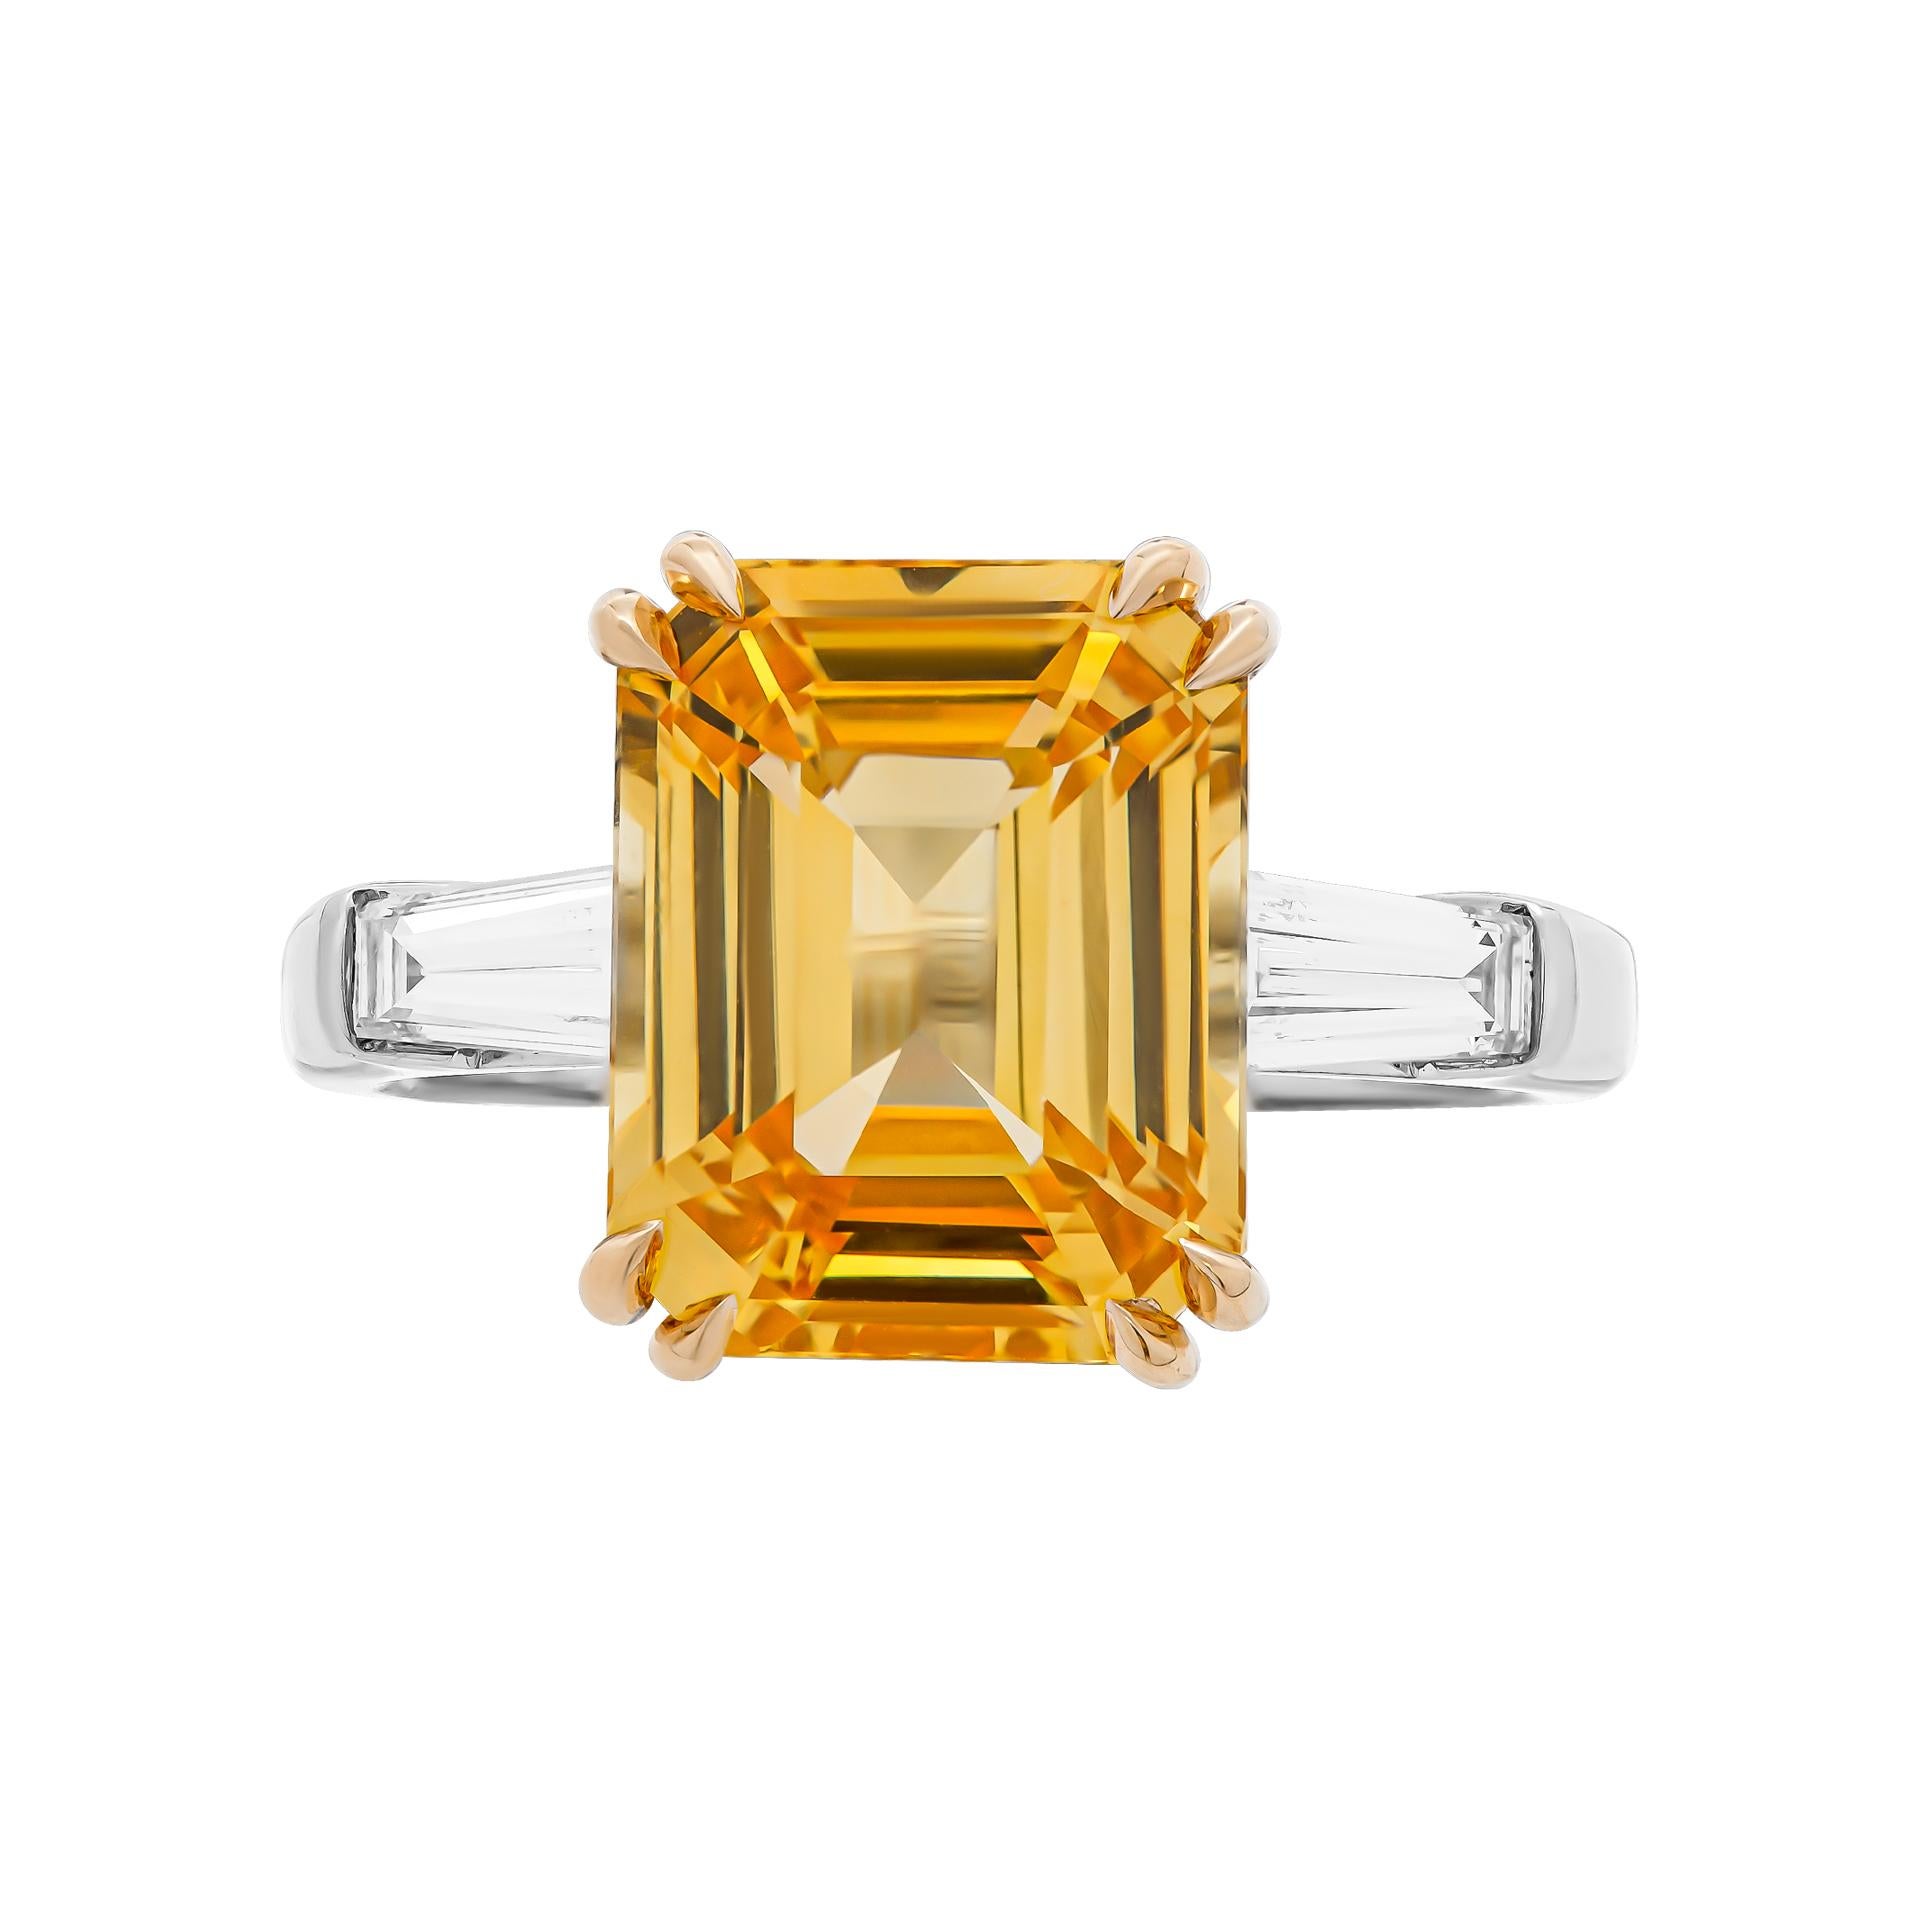 Plain 3 stone Engagement ring in Platinum & 18K Yellow Gold
7.04ct Vivid Yellow Octagonal/Step cut Sapphire 
Certificate: CDC2009878 (heated)
Sri Lanka Sides stones: 0.51ct G VVS tapered baguette
 Size: 6.5
Comes with certificate, appraisal